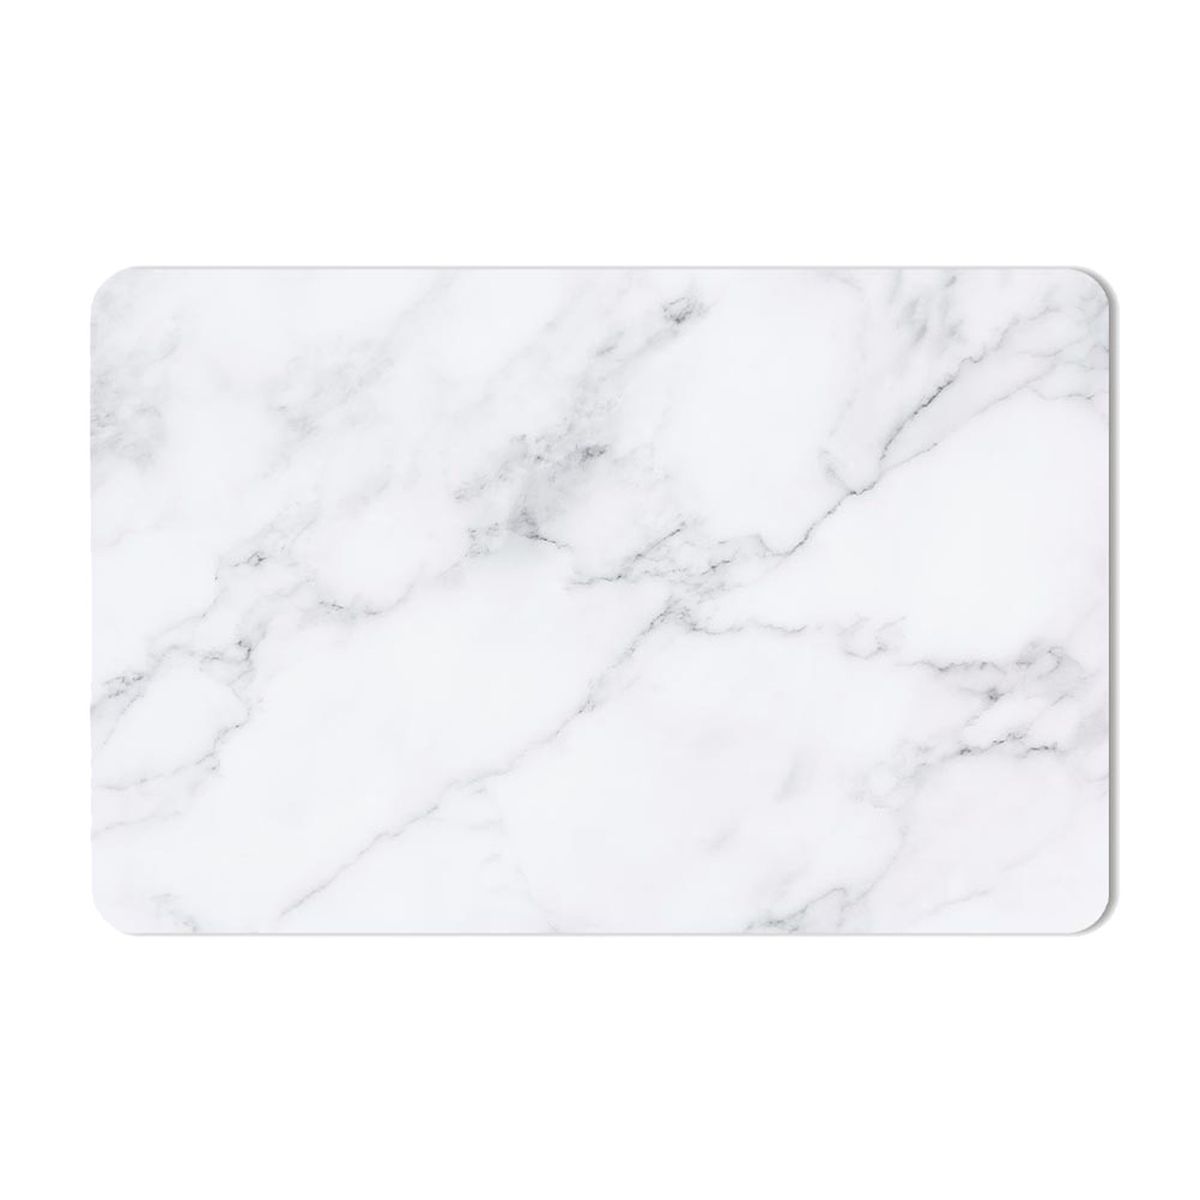 Placemat - Marble